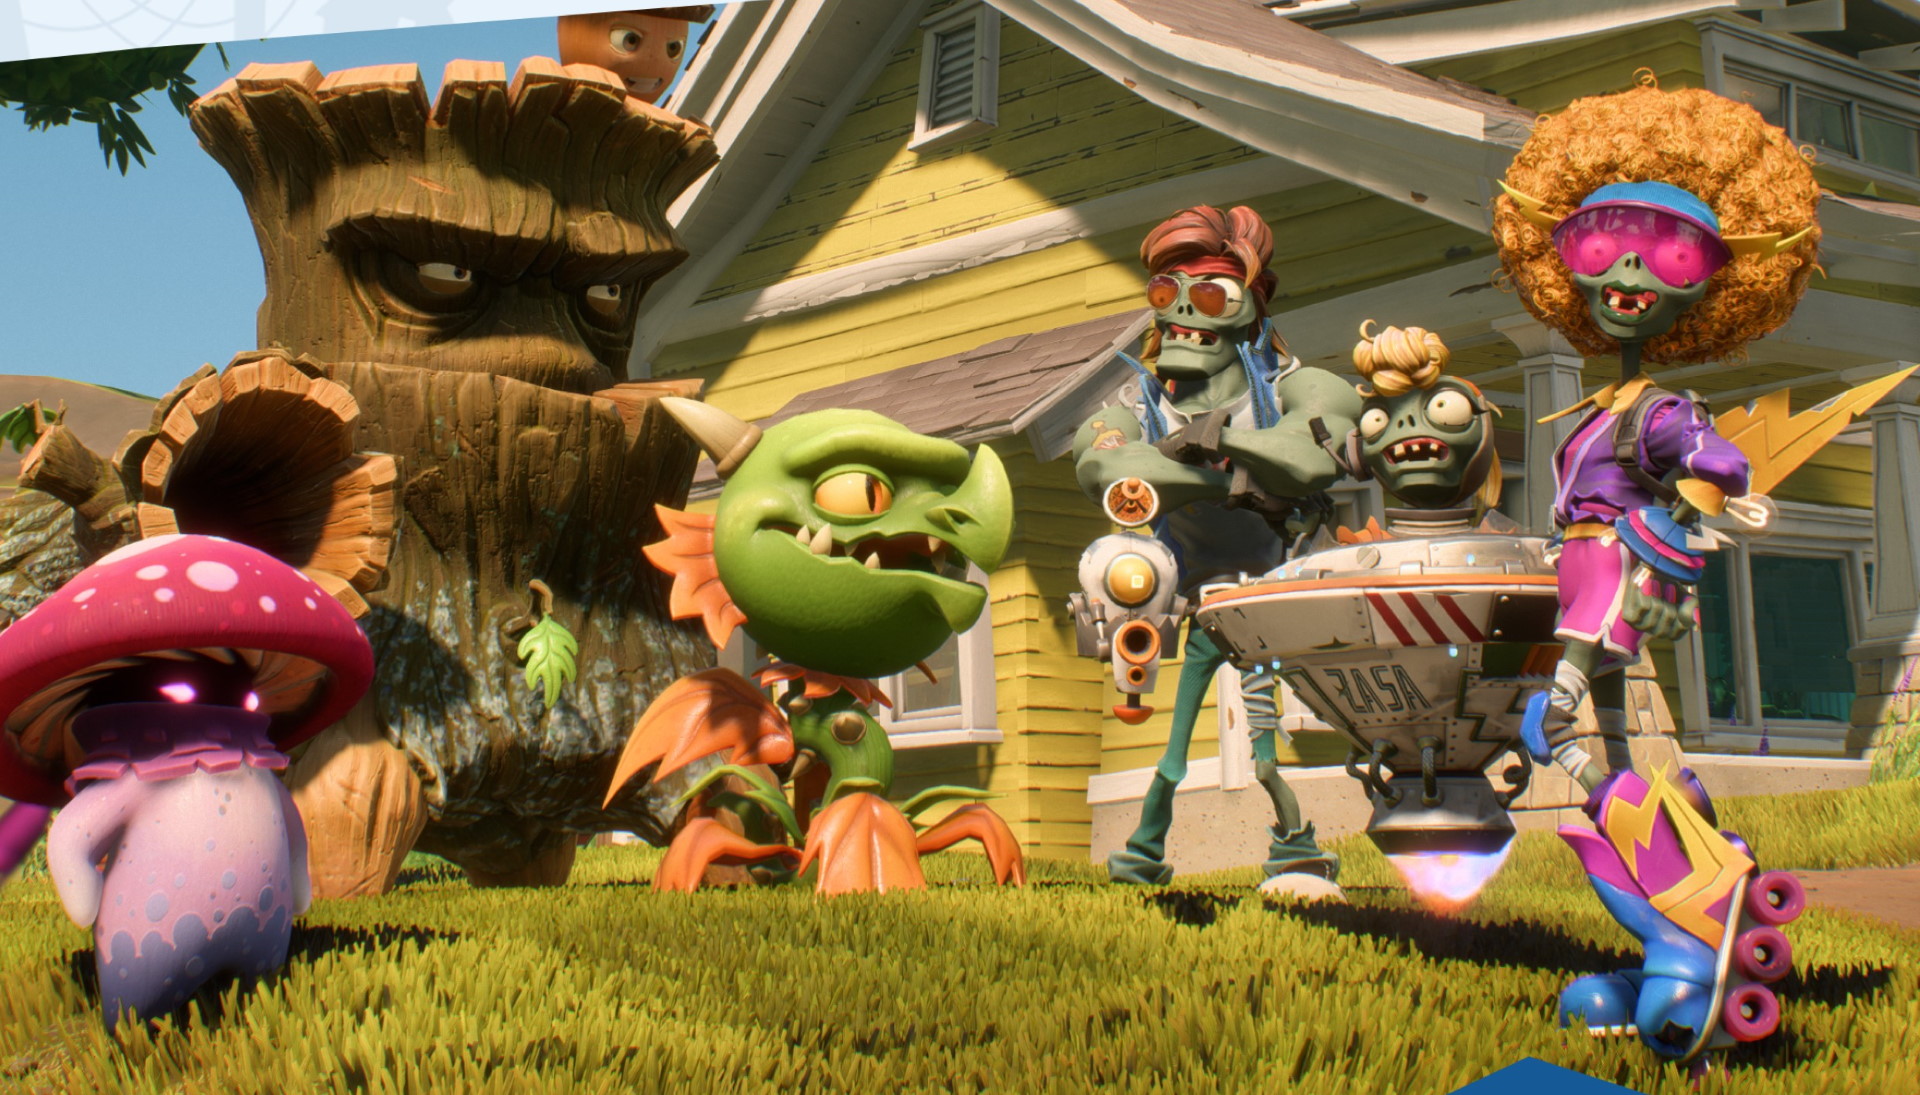 Plants vs. Zombies 4 characters, Zombie, Video game, battle for